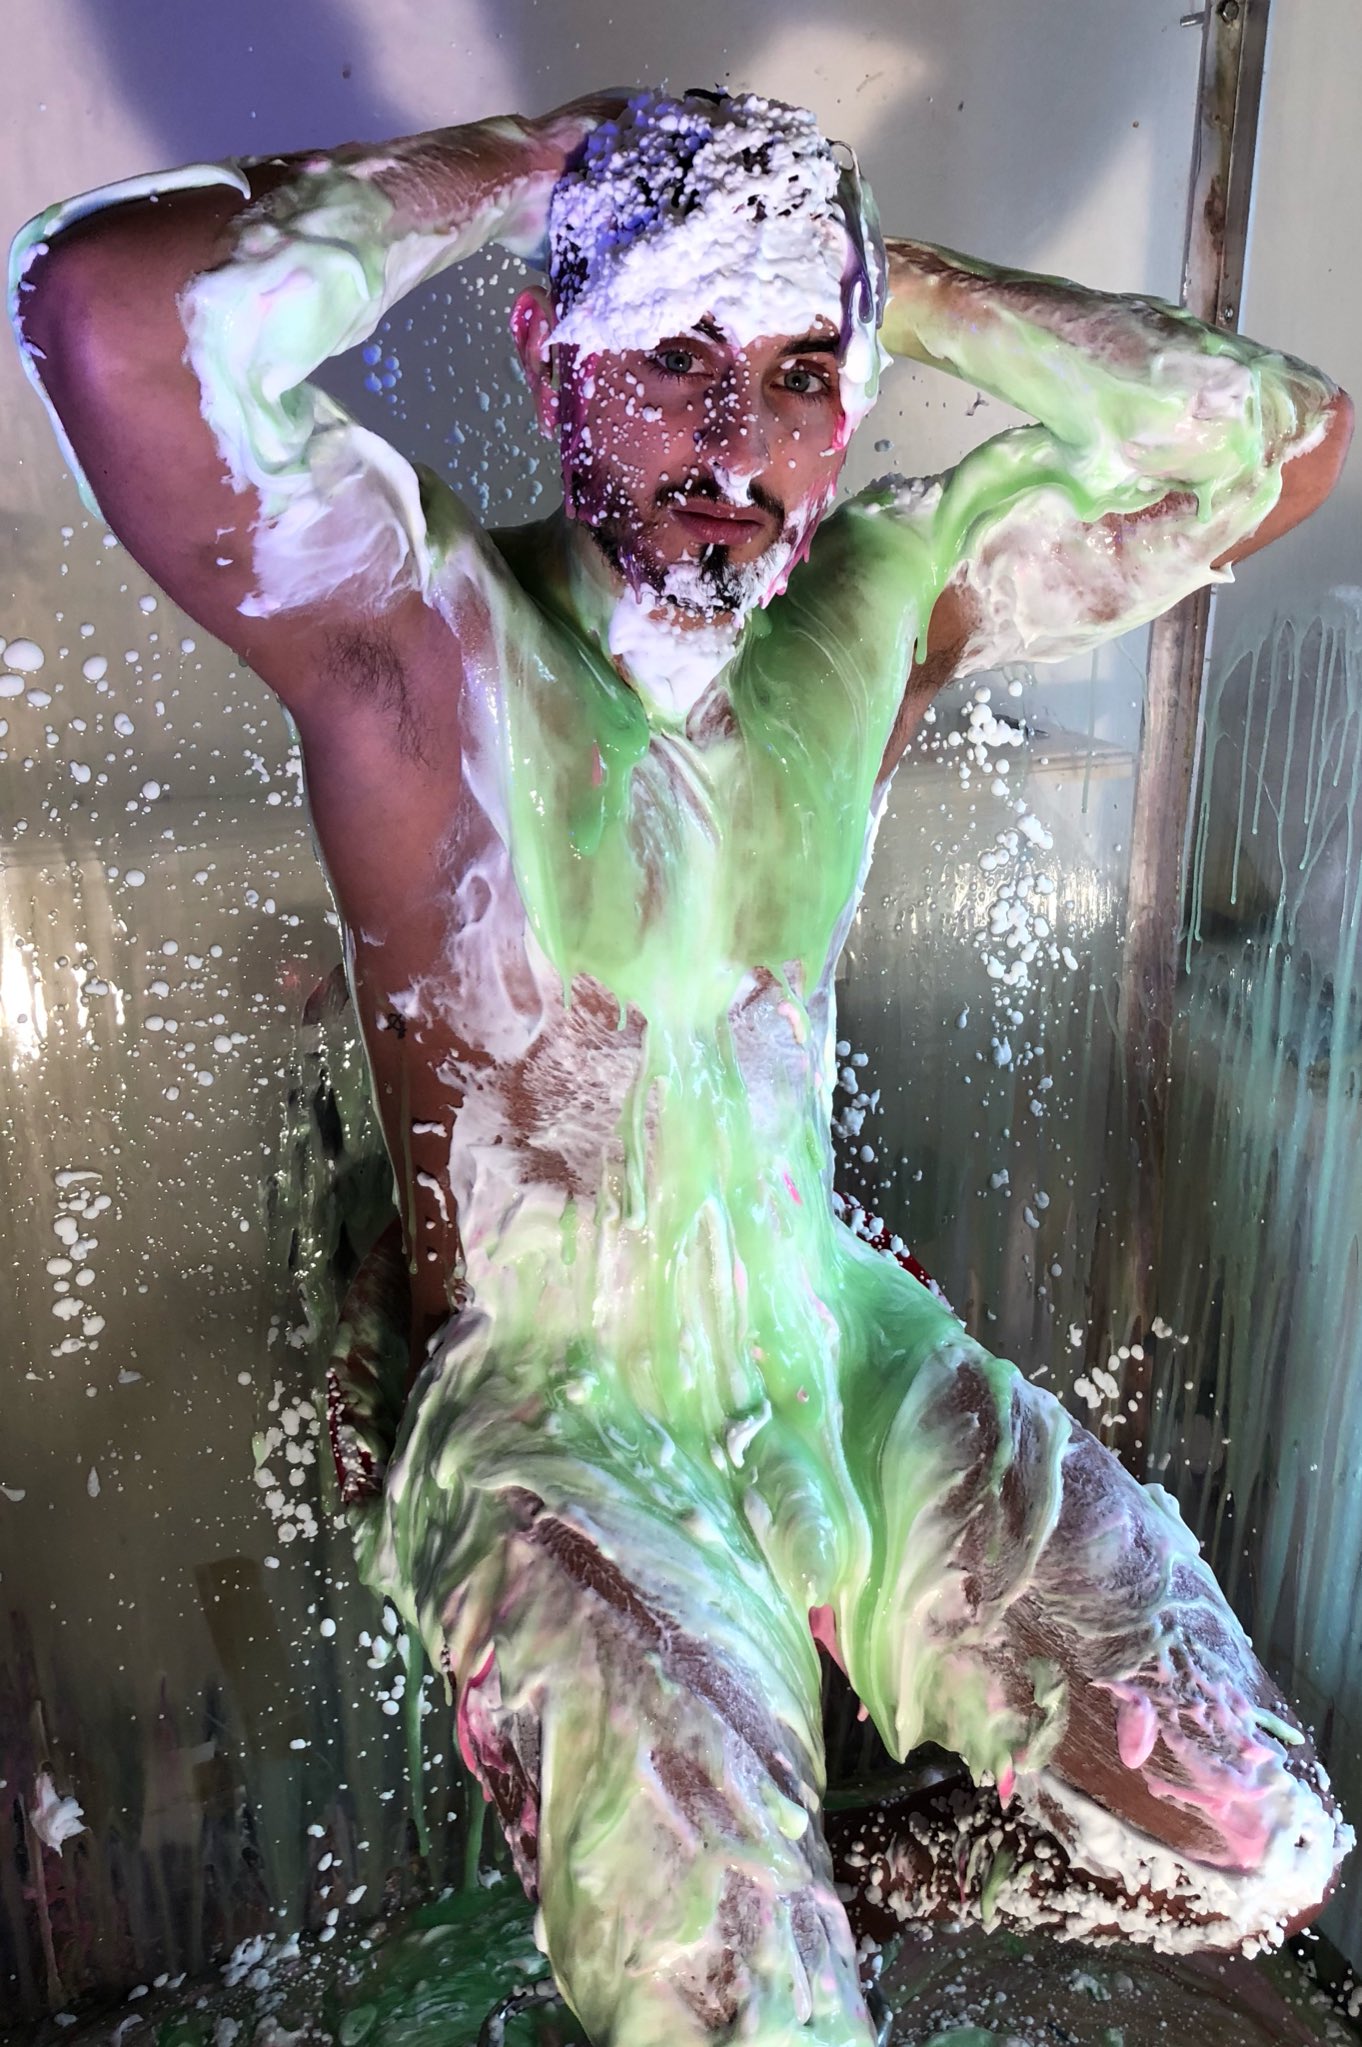 Gunge Studs X on Twitter: "Get a early look at our recent shoot with